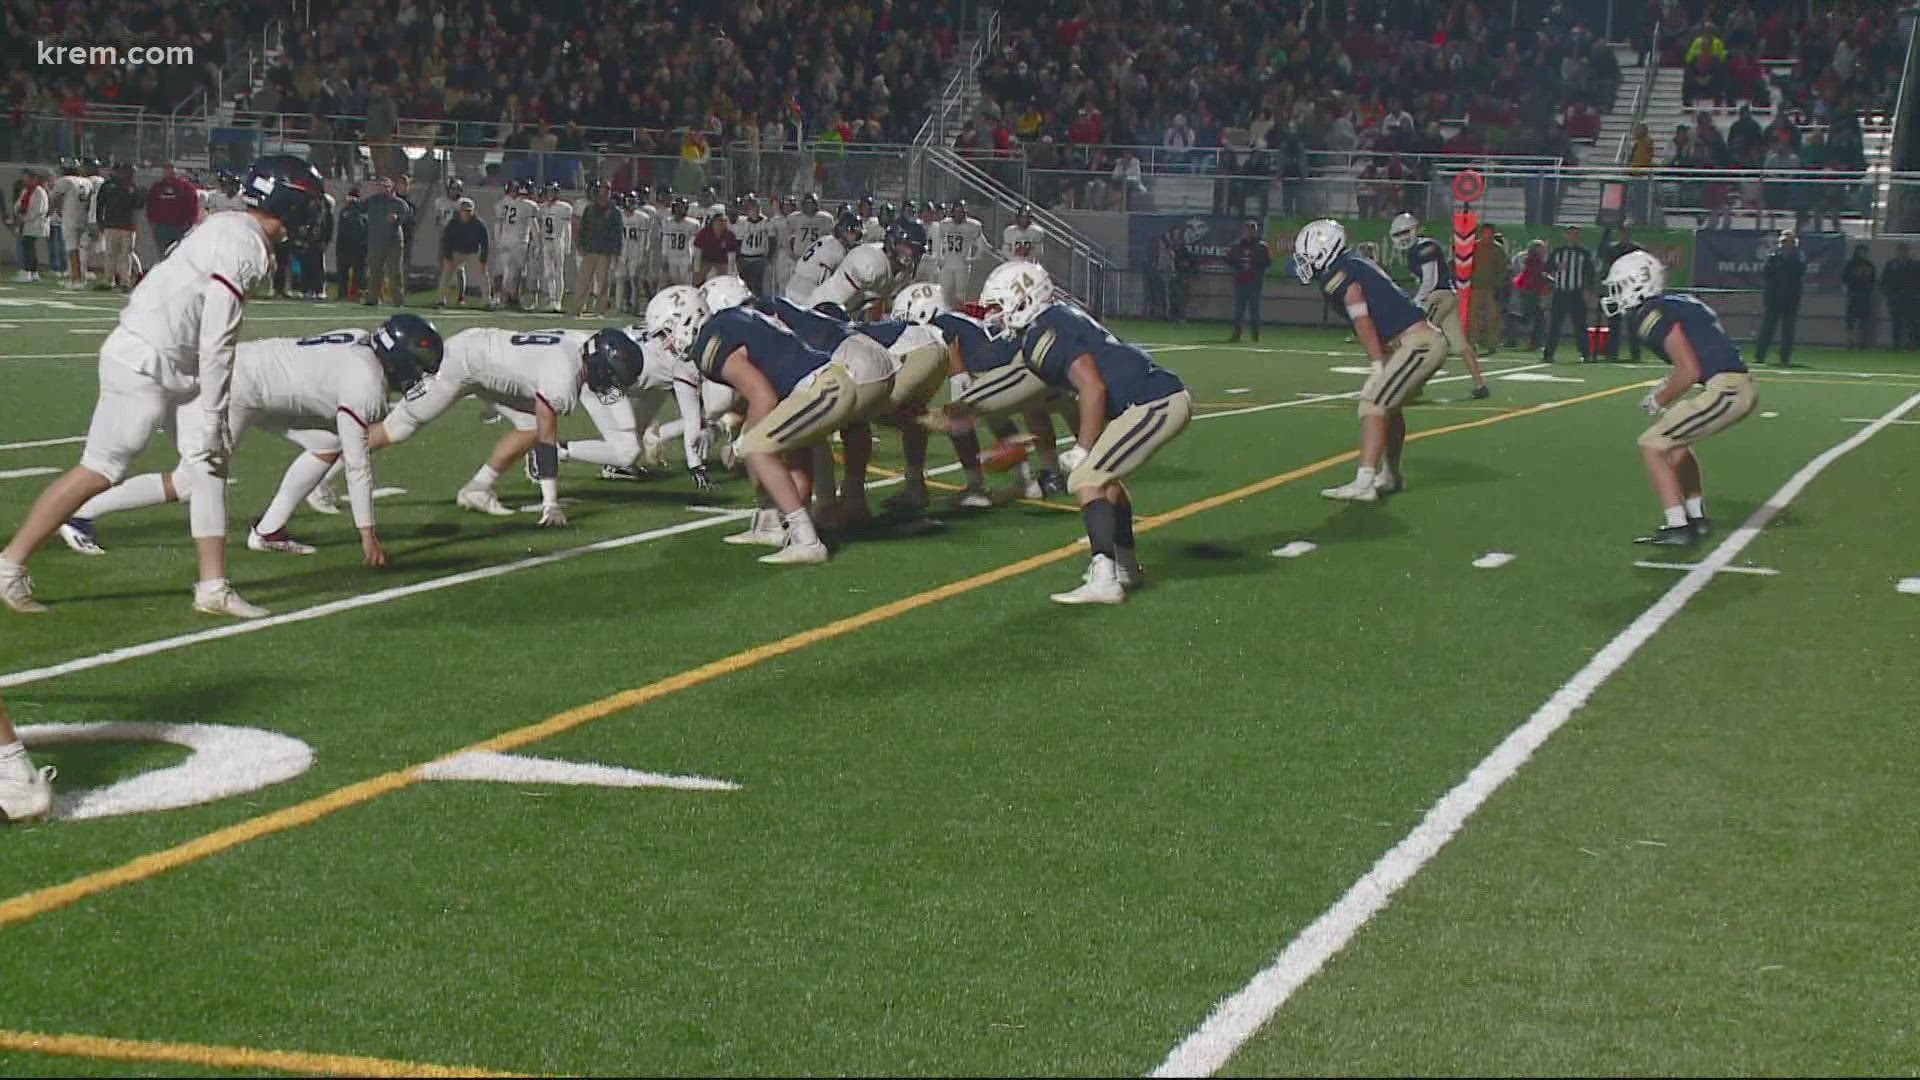 Highlights from high school football games across the Inland Northwest on Friday, Oct. 15.